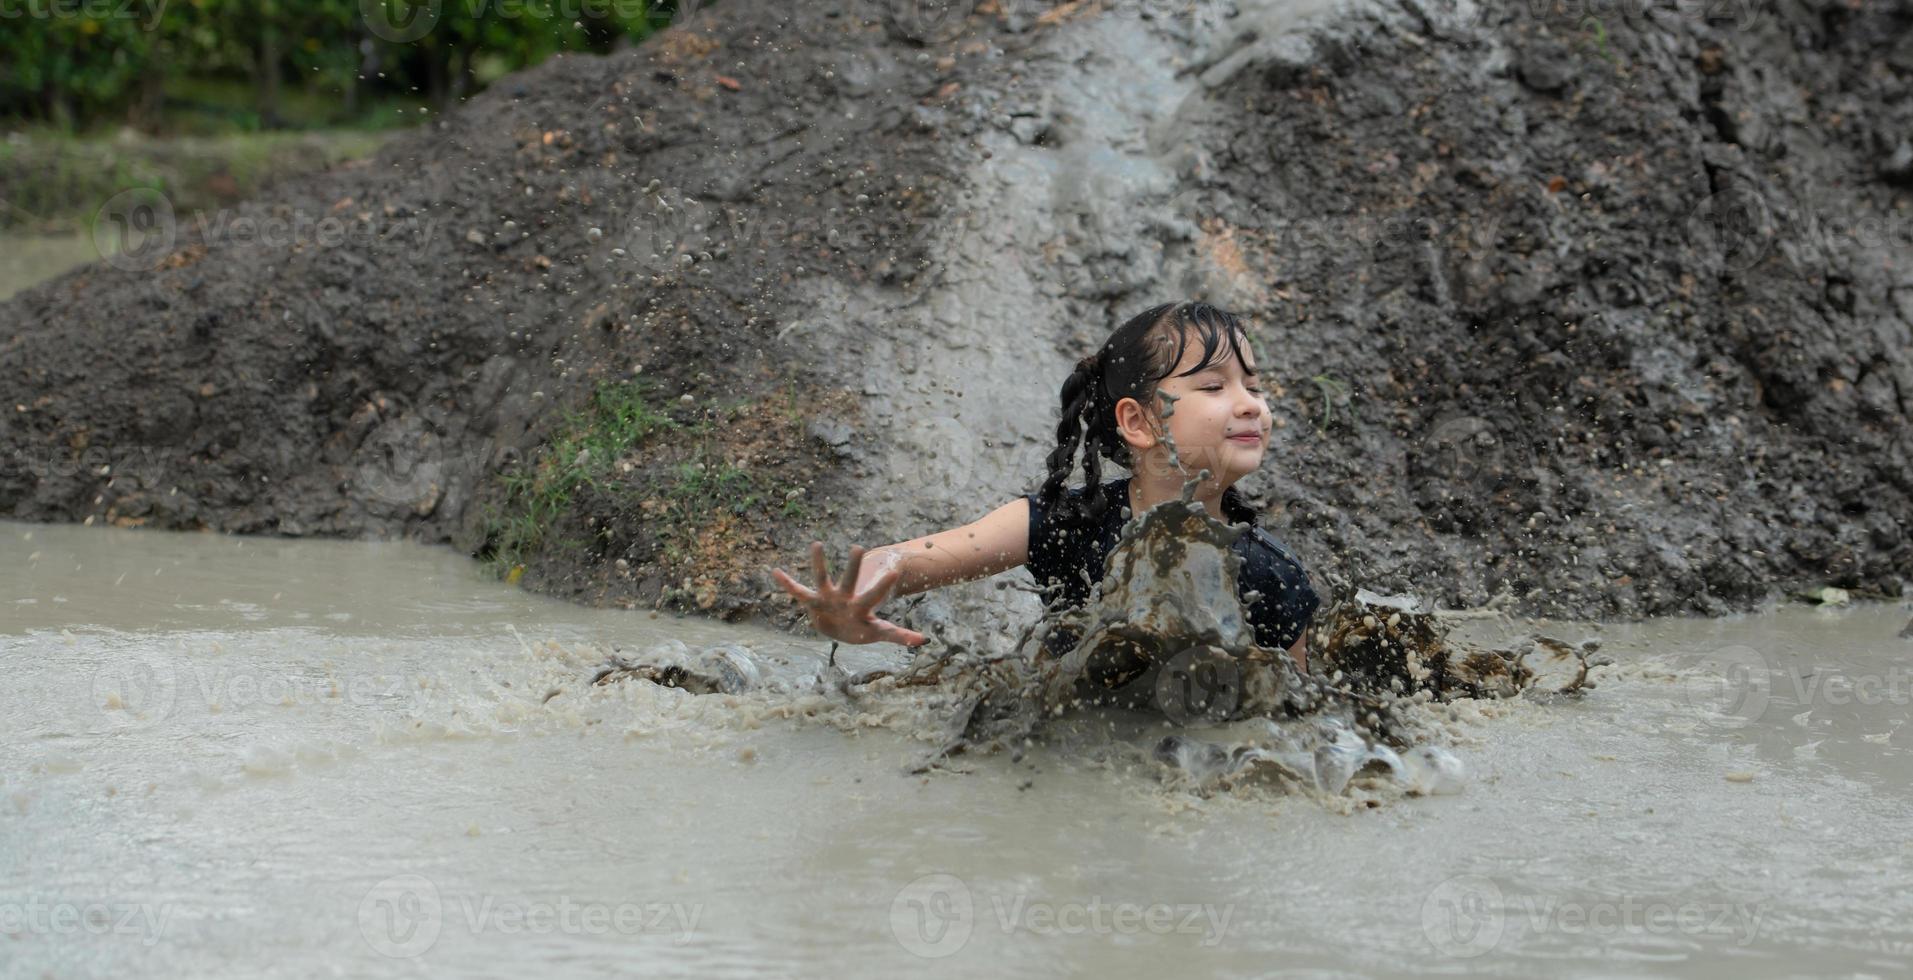 Little girls have fun playing in the mud in the community fields photo